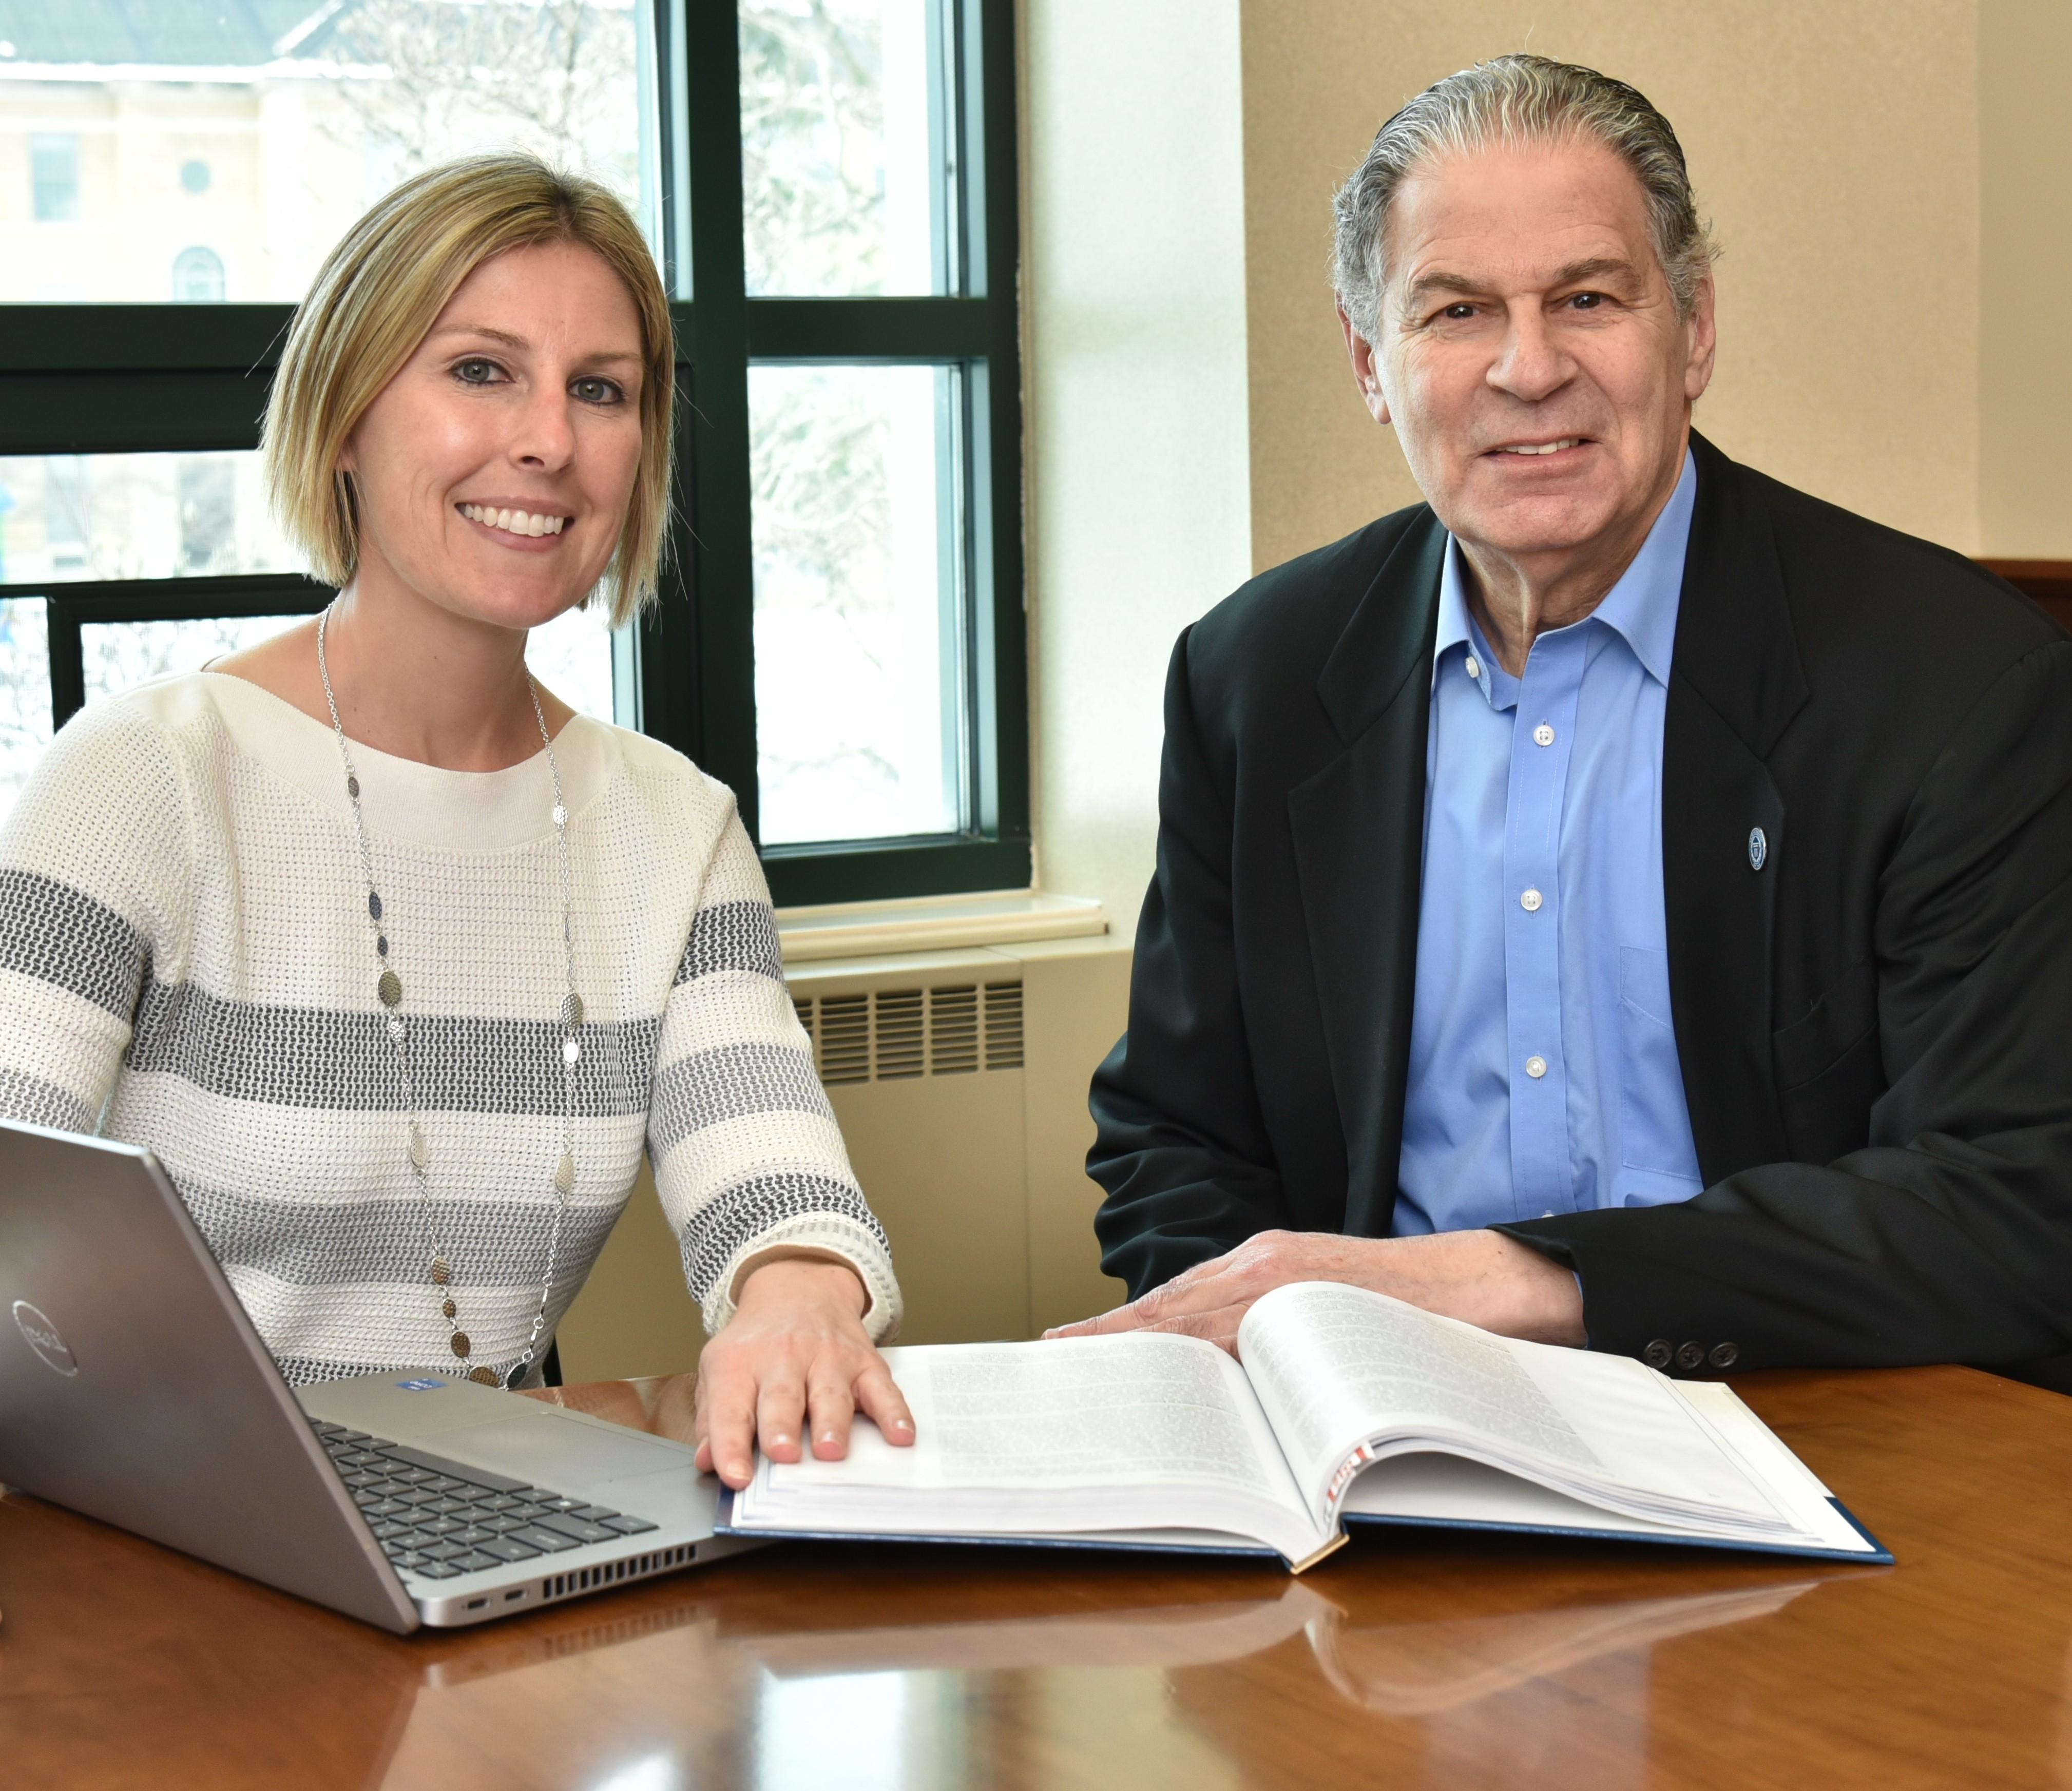 SUNY Oswego School of Business faculty members Kristin Lee Sotak and Barry A. Friedman recently published research based on the question: When people see what you’re wearing, do they think you're ethical?